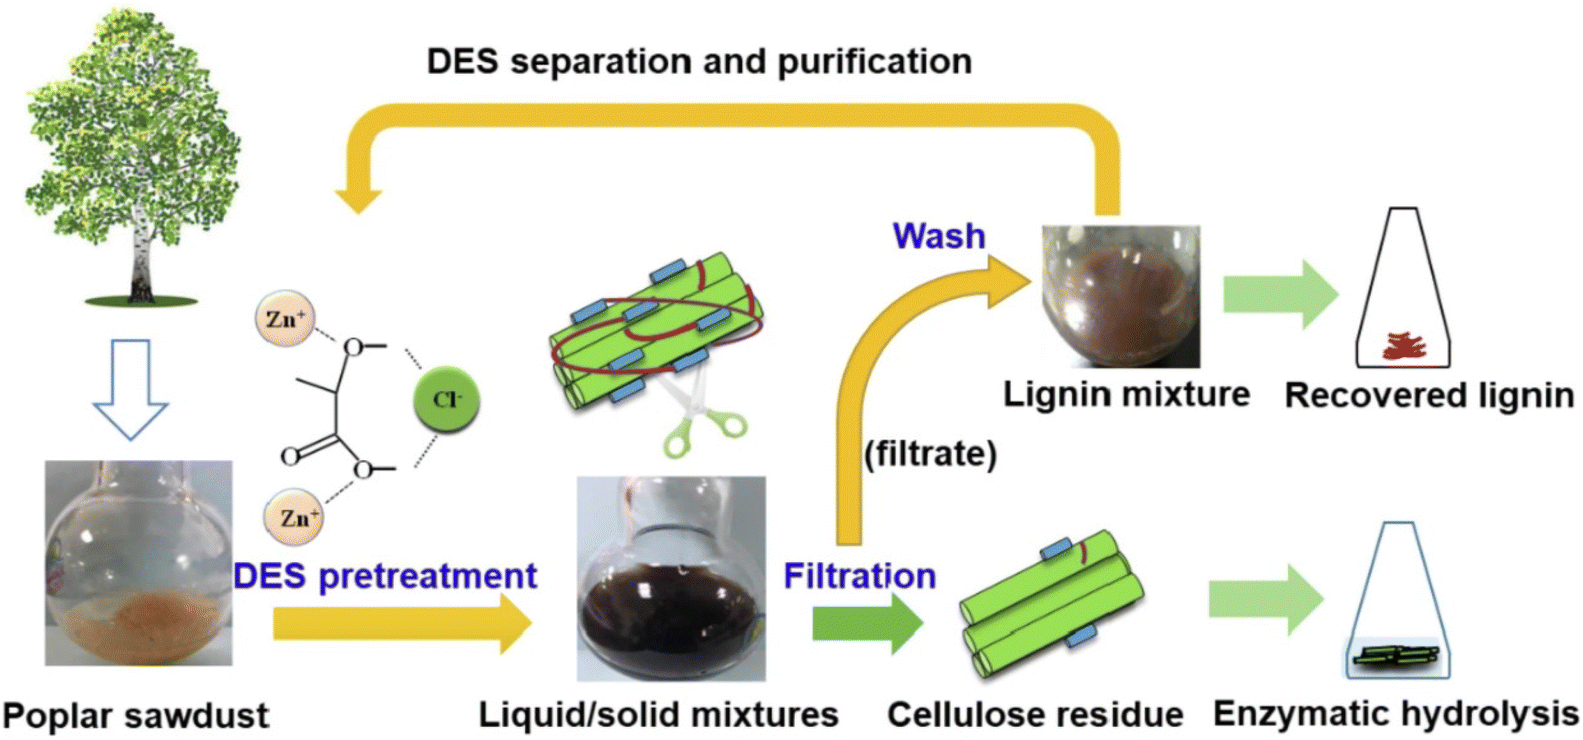 Introducing lignin as a binder material for the aqueous production